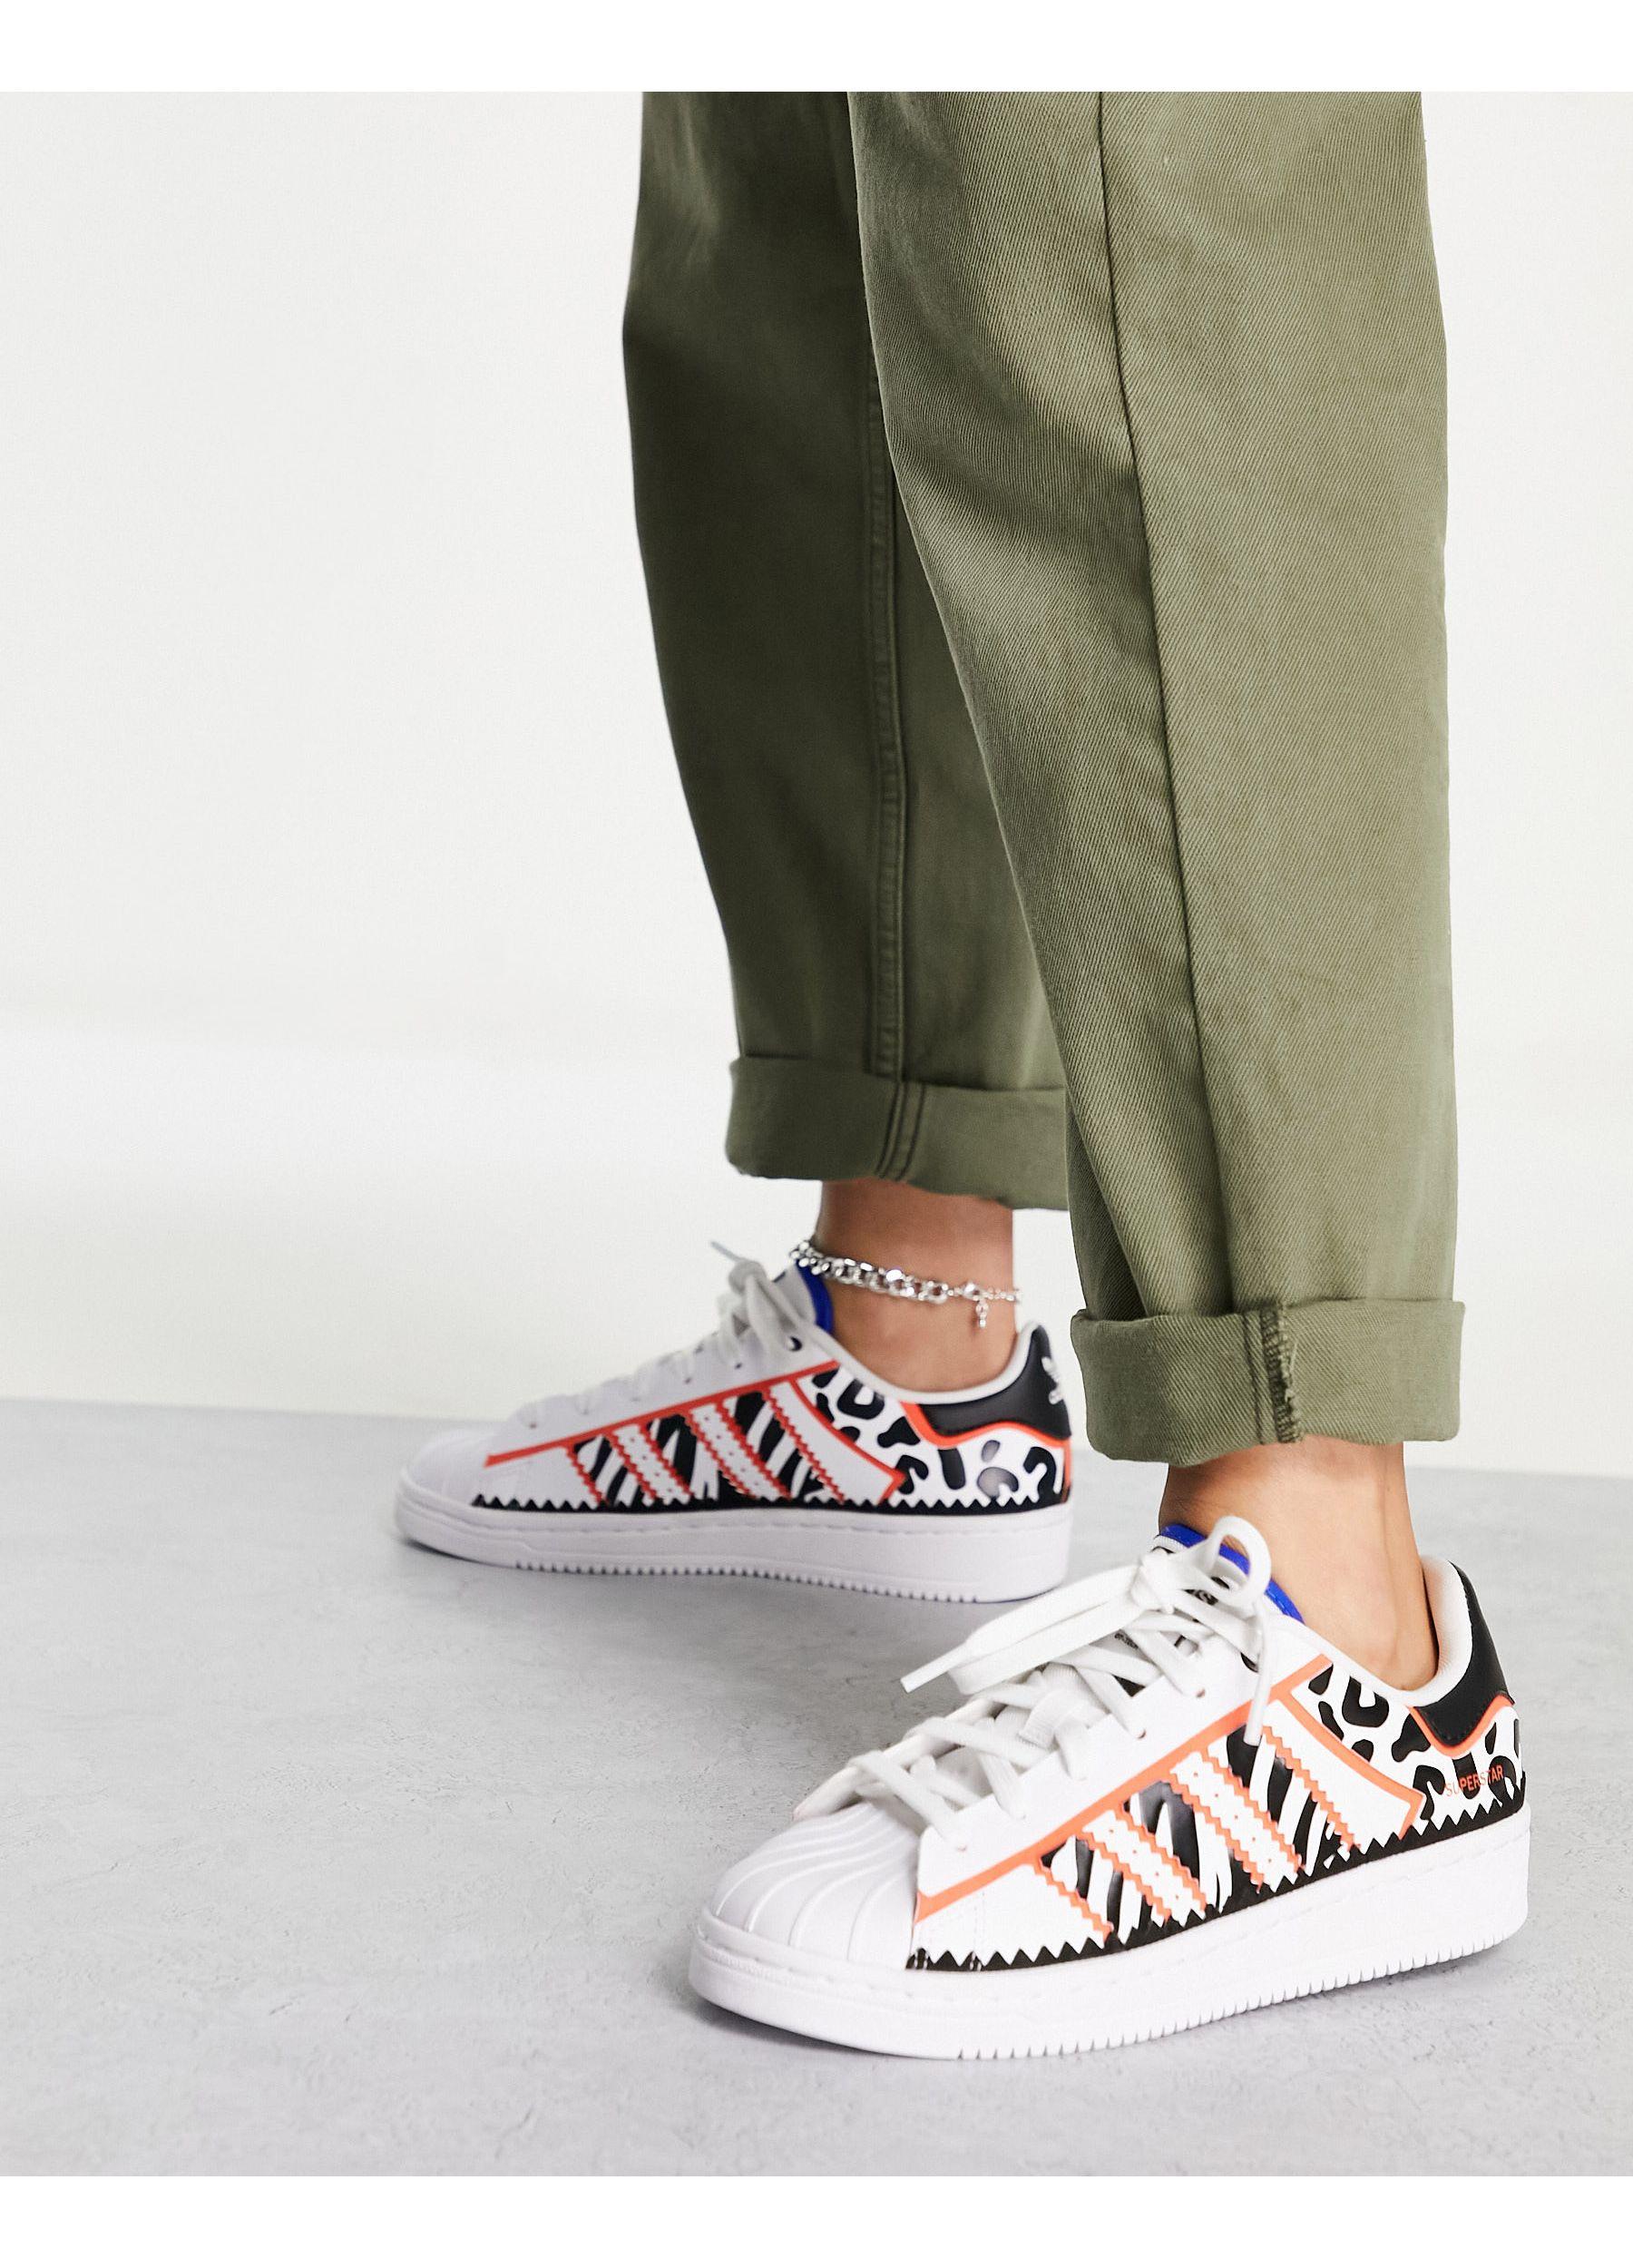 adidas Originals Superstar Tech Sneakers With Animal Print in White | Lyst